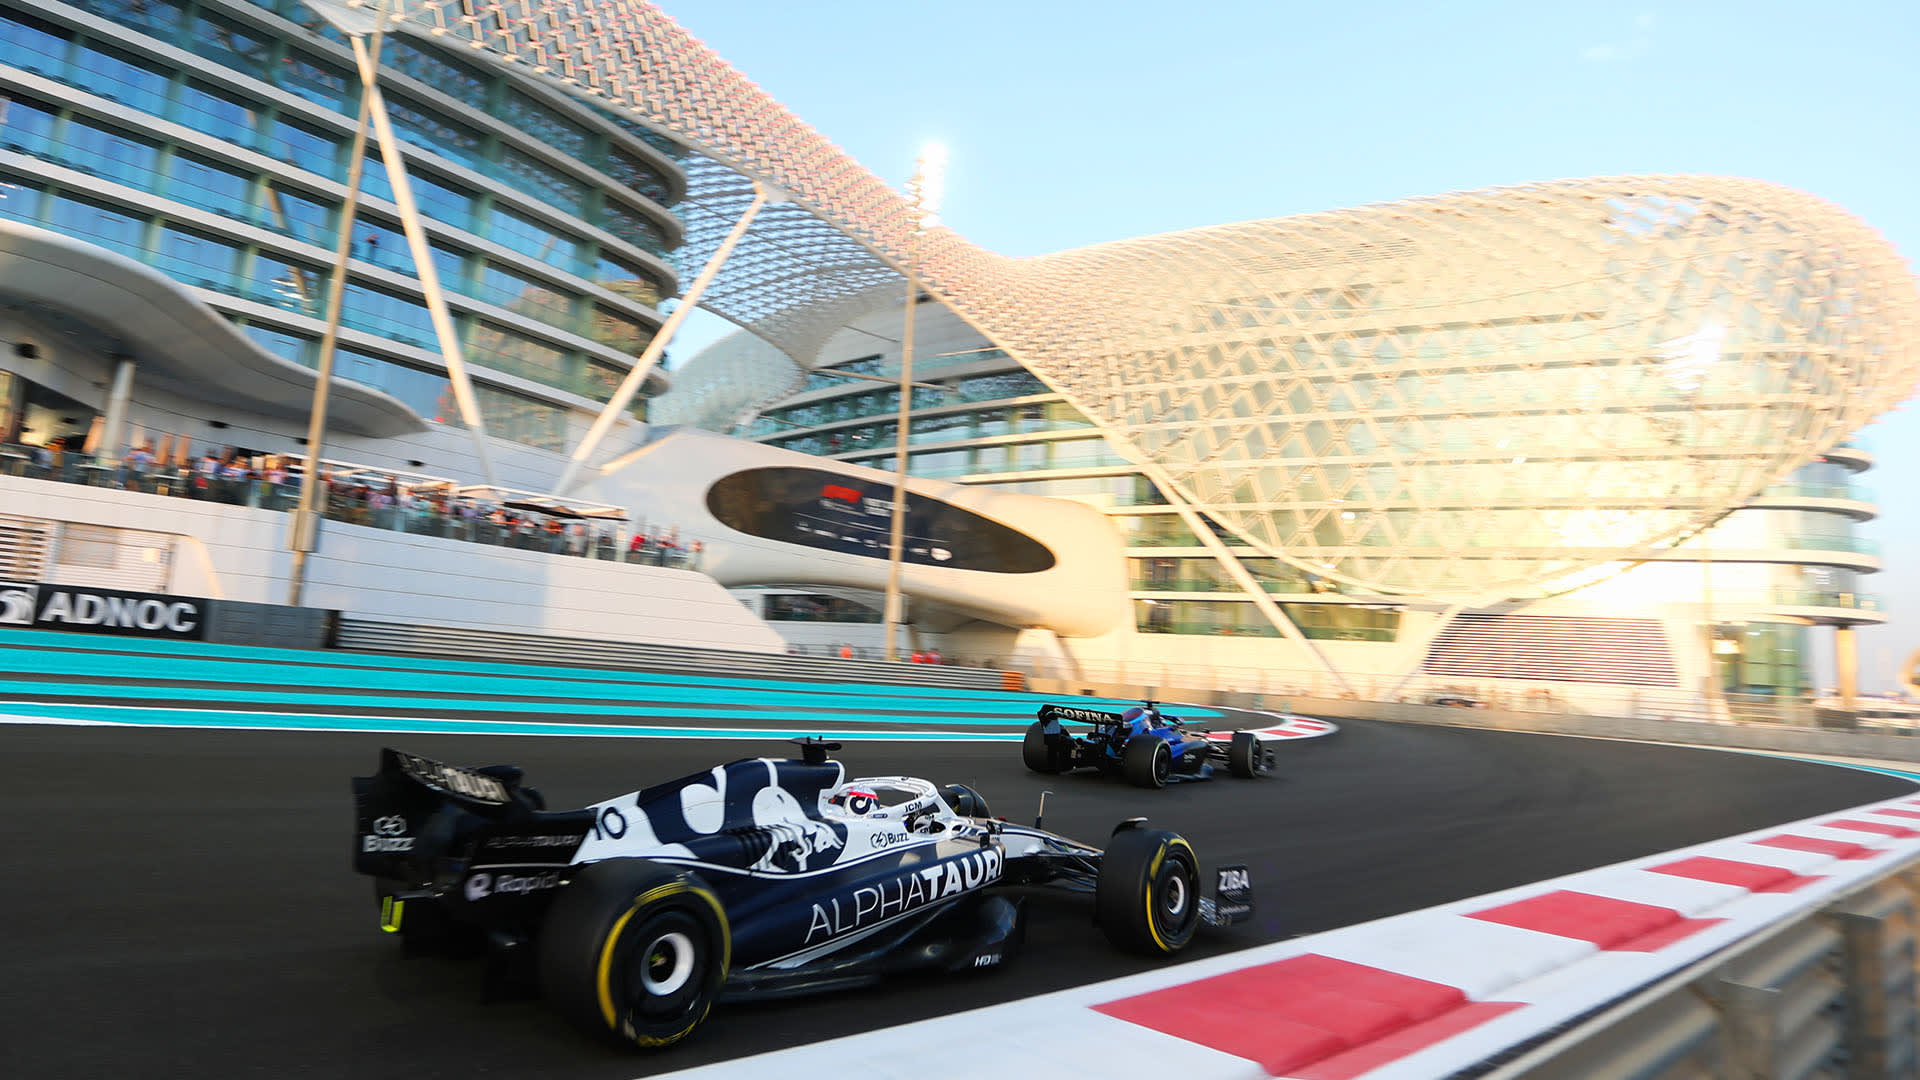 5 things we learned from Friday practice at the Abu Dhabi Grand Prix Formula 1®